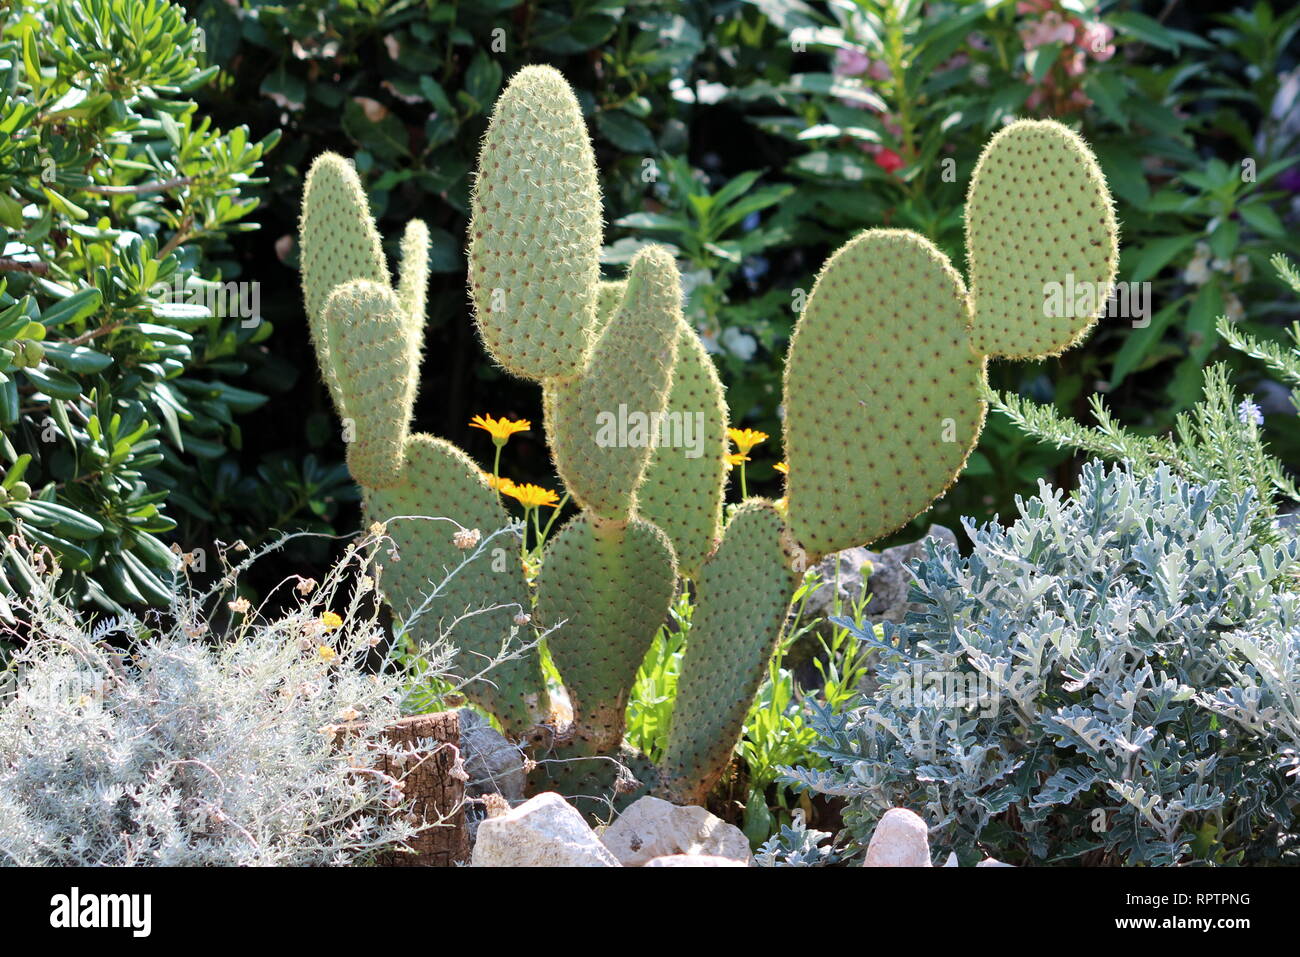 Barbary fig or Opuntia ficus-indica or Prickly pear or Indian fig opuntia or Cactus pear or Spineless cactus with scarce needles Stock Photo